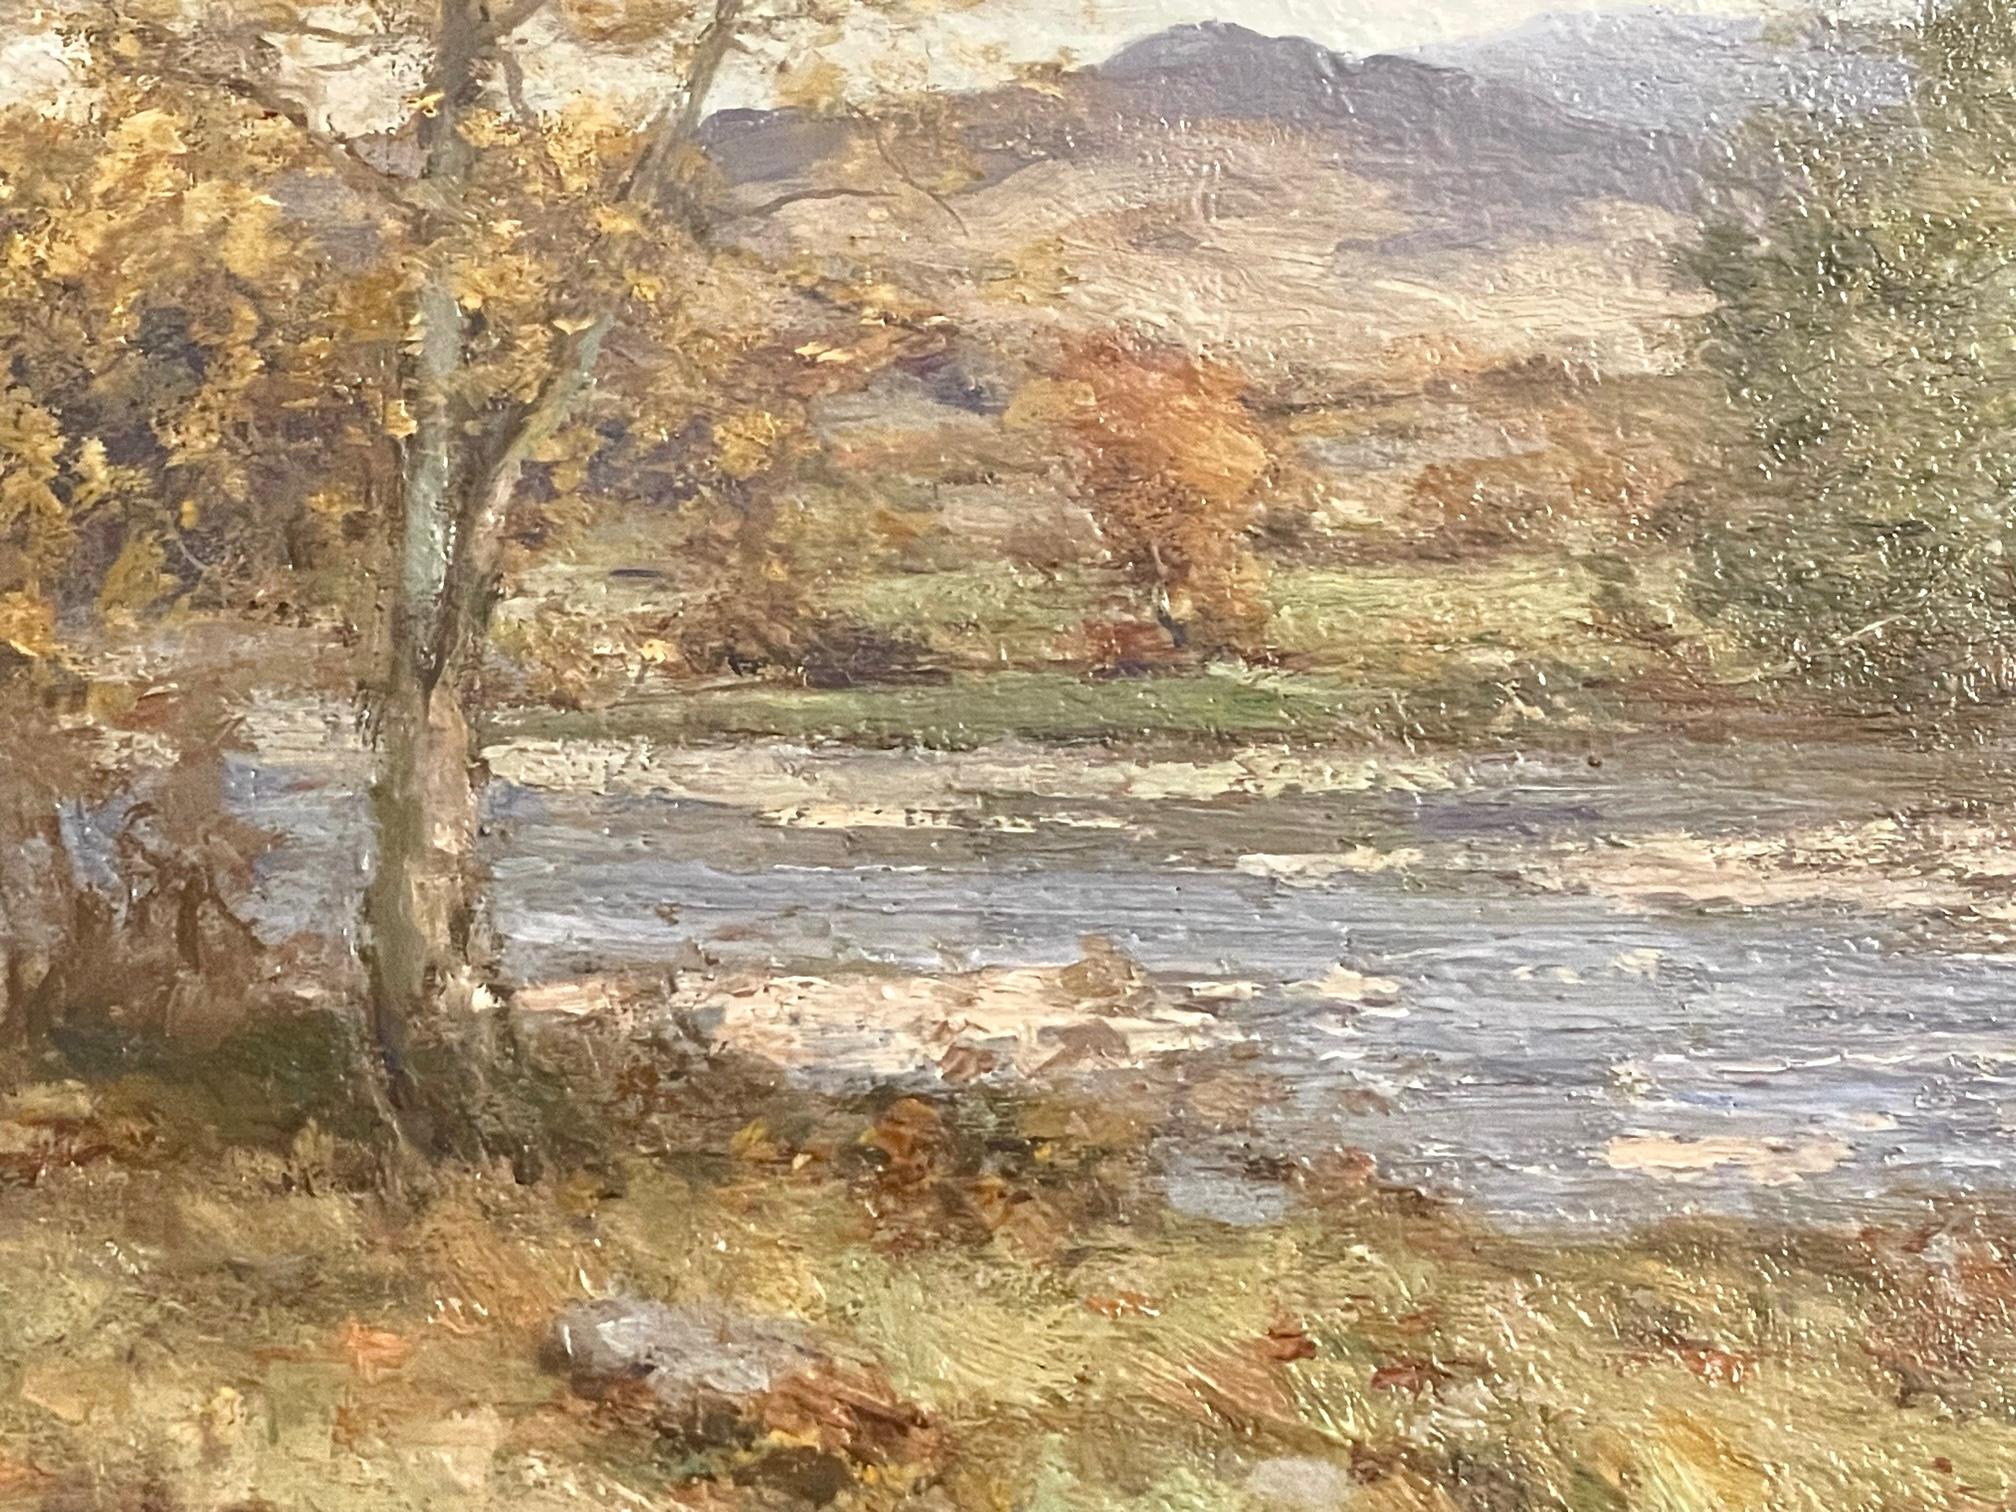 The River in October